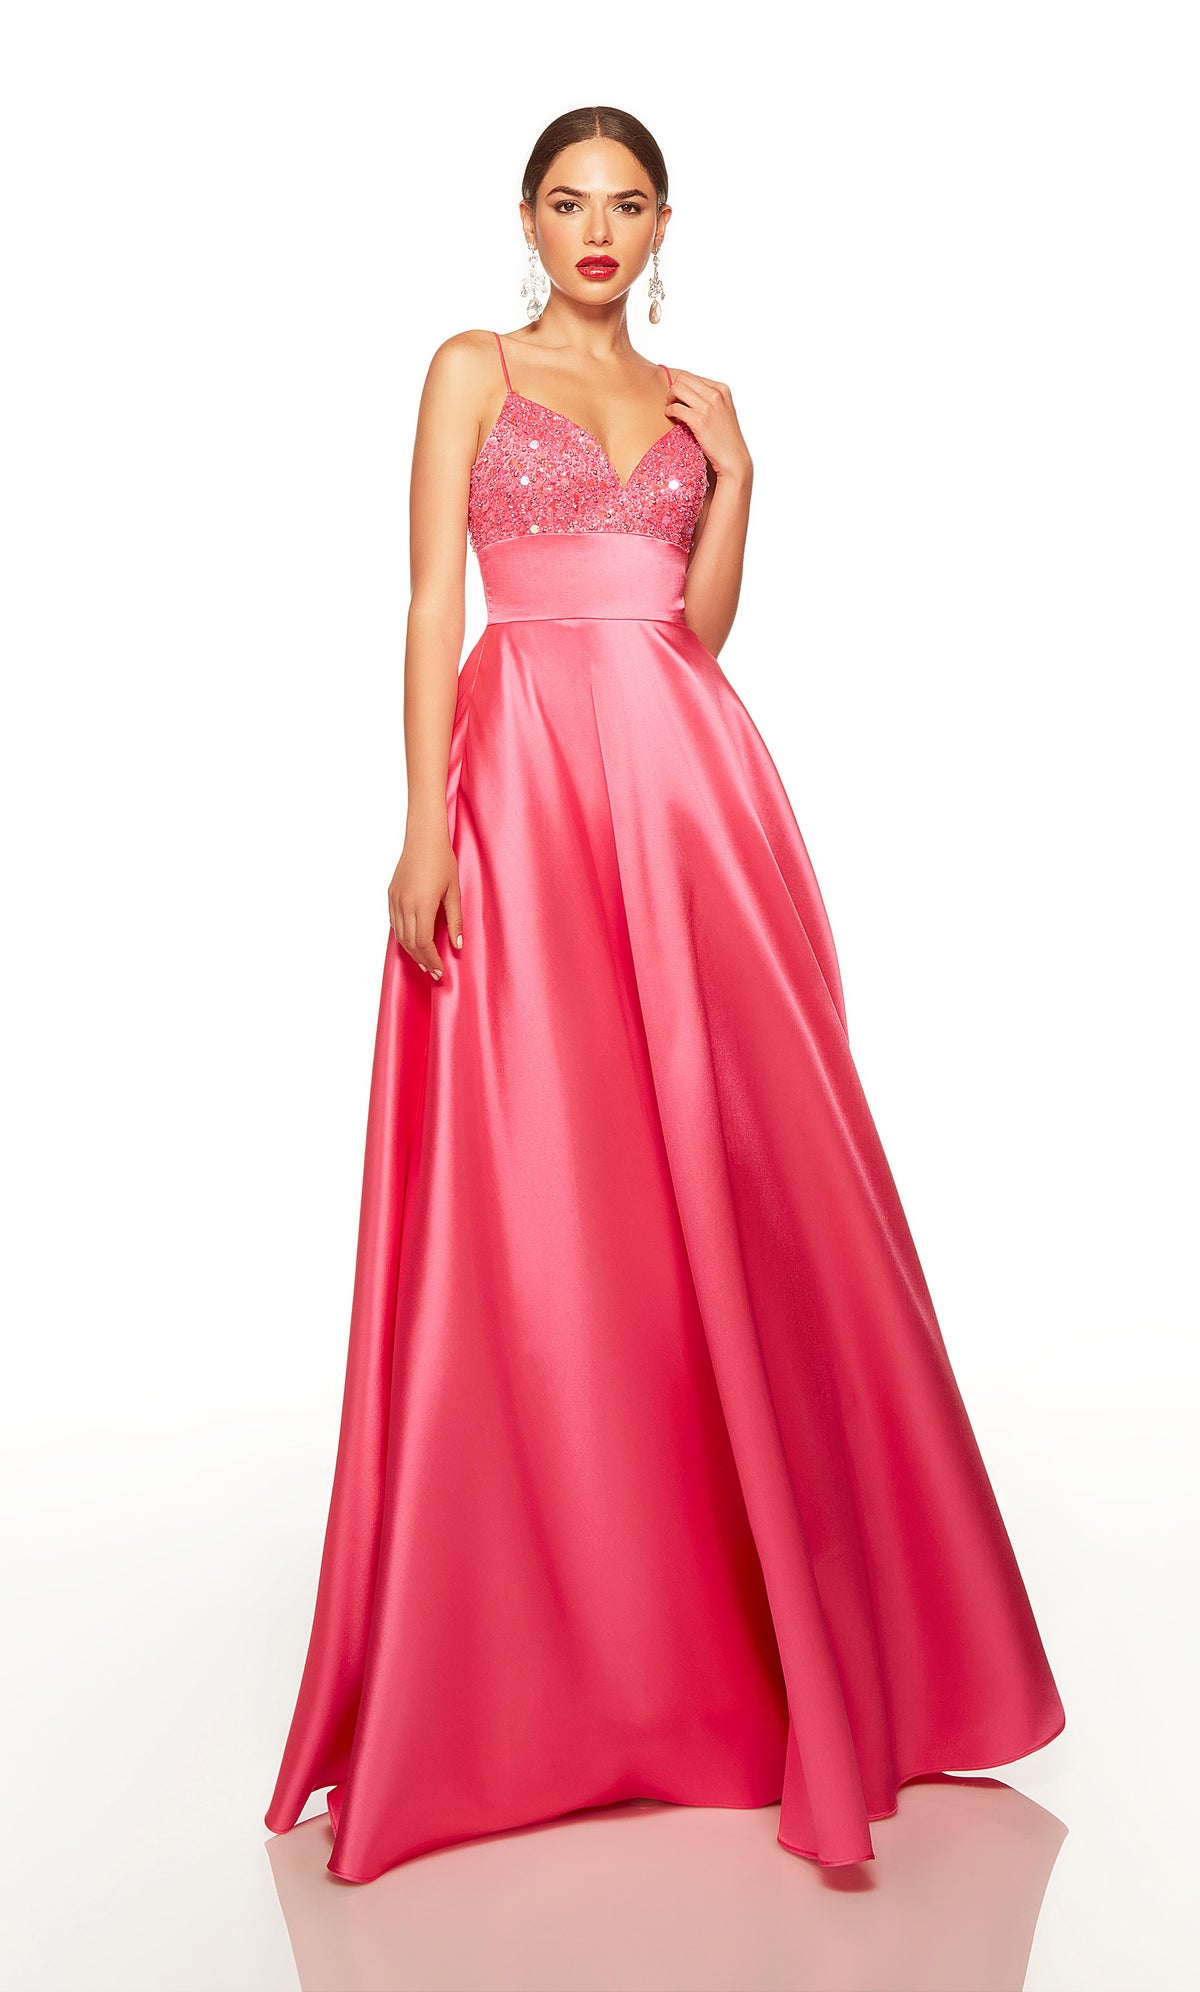 Long hot pink prom dress with a sweetheart neckline, beaded bodice, and pockets. COLOR-SWATCH_1763__HOT-PINK